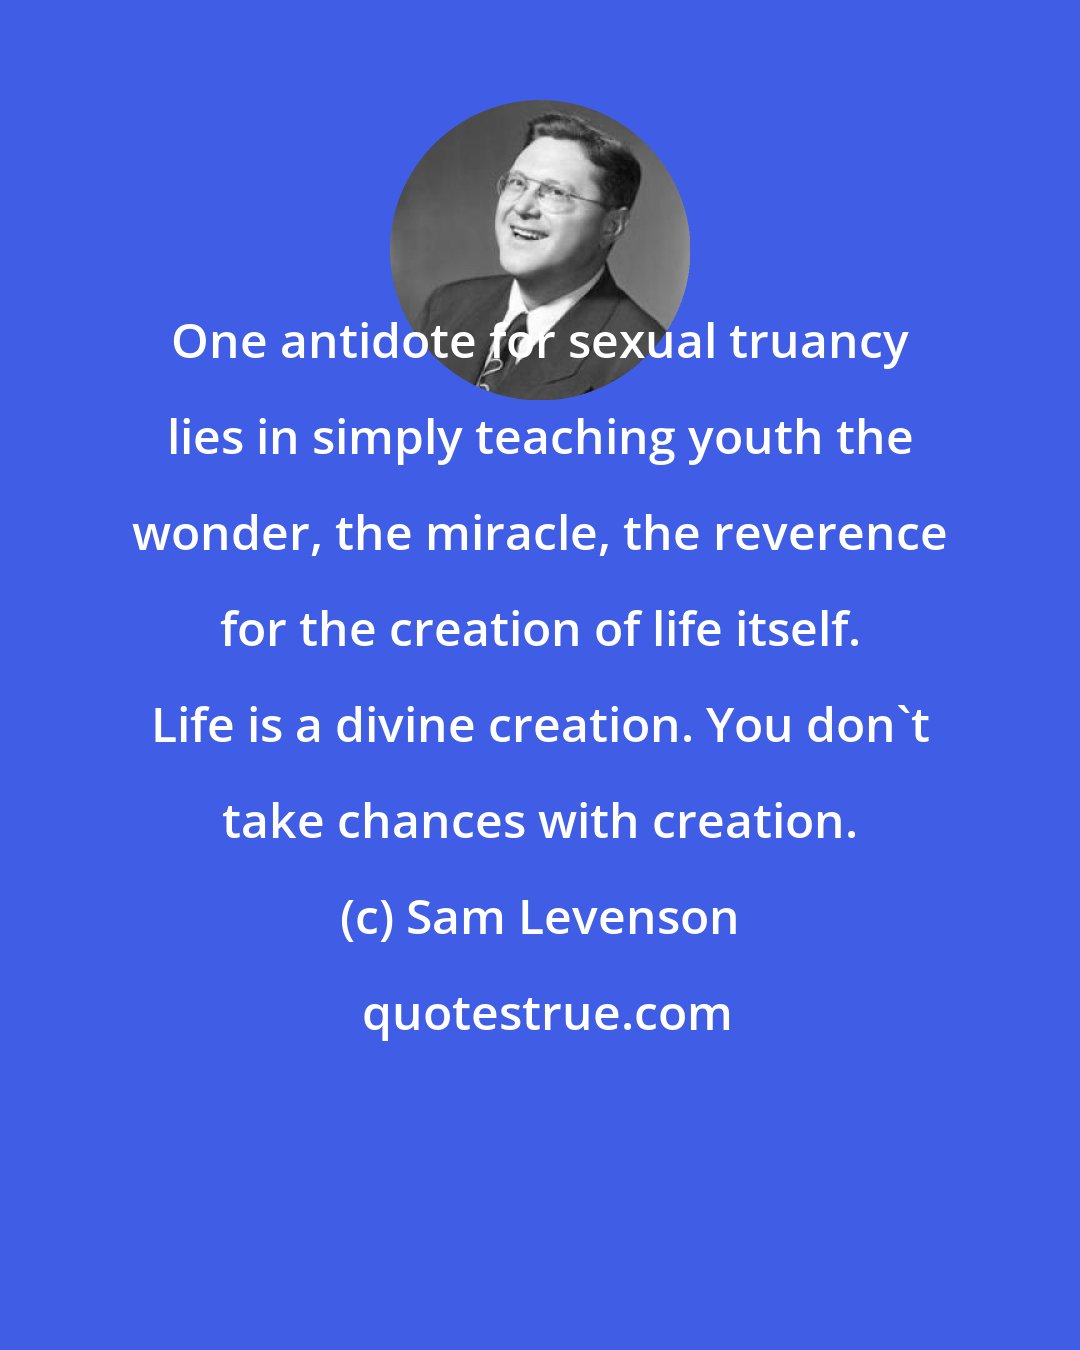 Sam Levenson: One antidote for sexual truancy lies in simply teaching youth the wonder, the miracle, the reverence for the creation of life itself. Life is a divine creation. You don't take chances with creation.